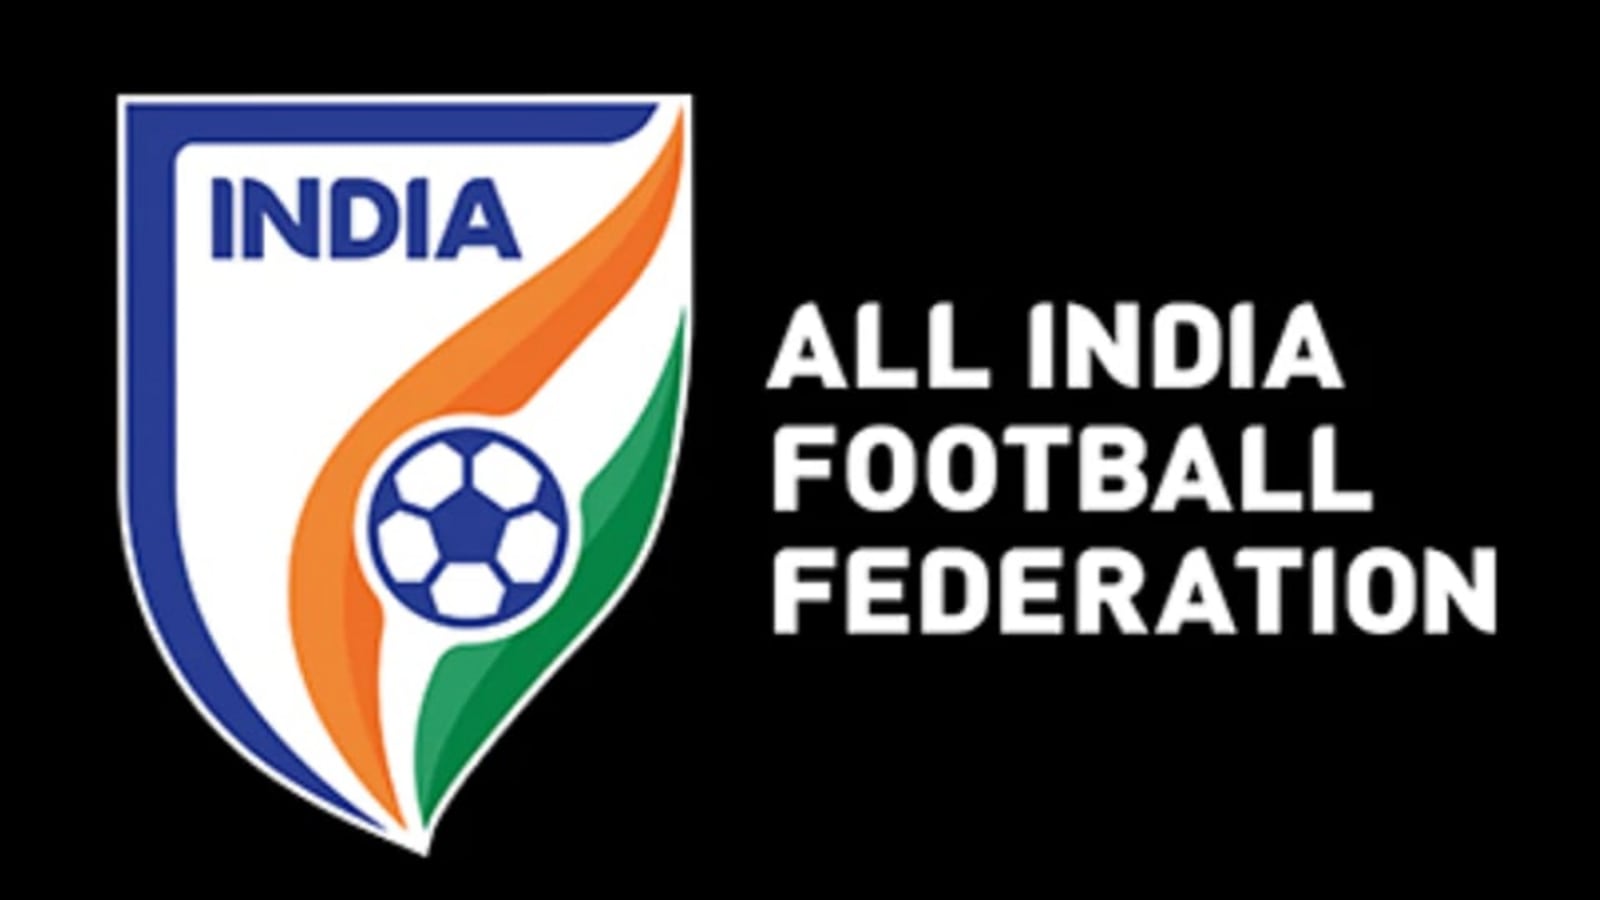 fifa-bans-india-takes-away-hosting-rights-of-women-s-under-17-world-cup